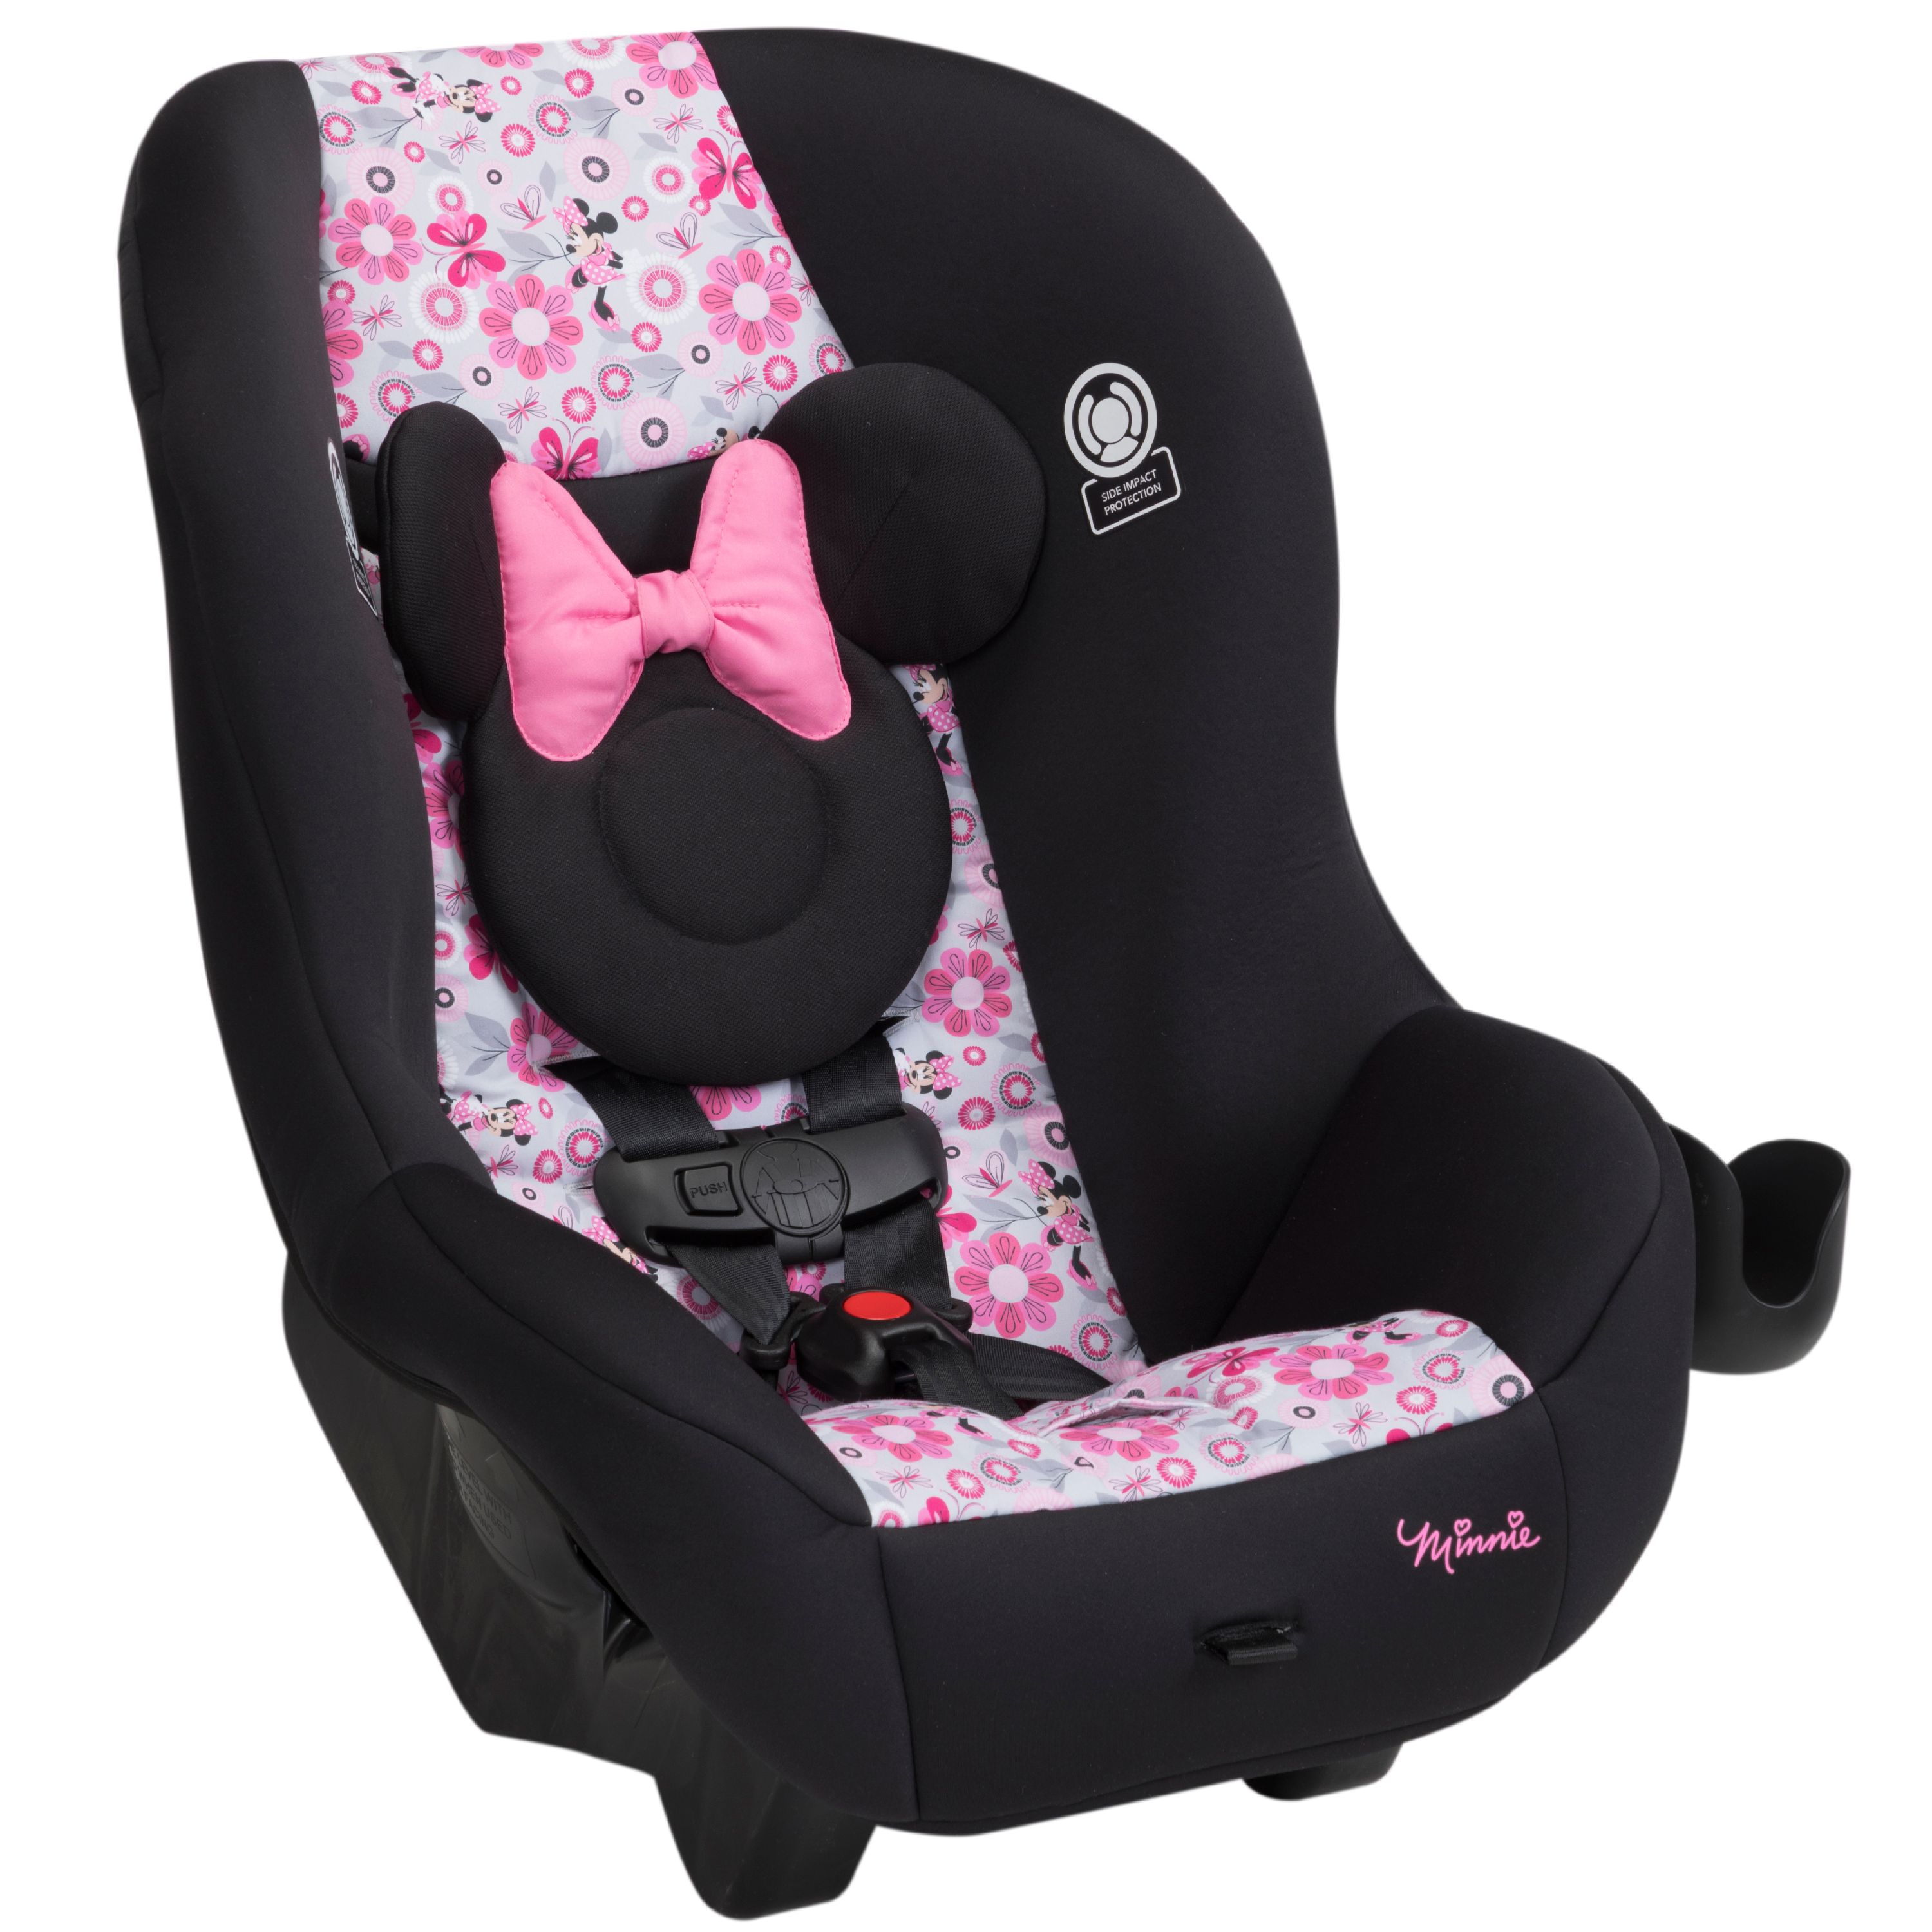 Disney Baby Scenera NEXT Luxe Convertible Car Seat, Minnie Meadow - image 4 of 15